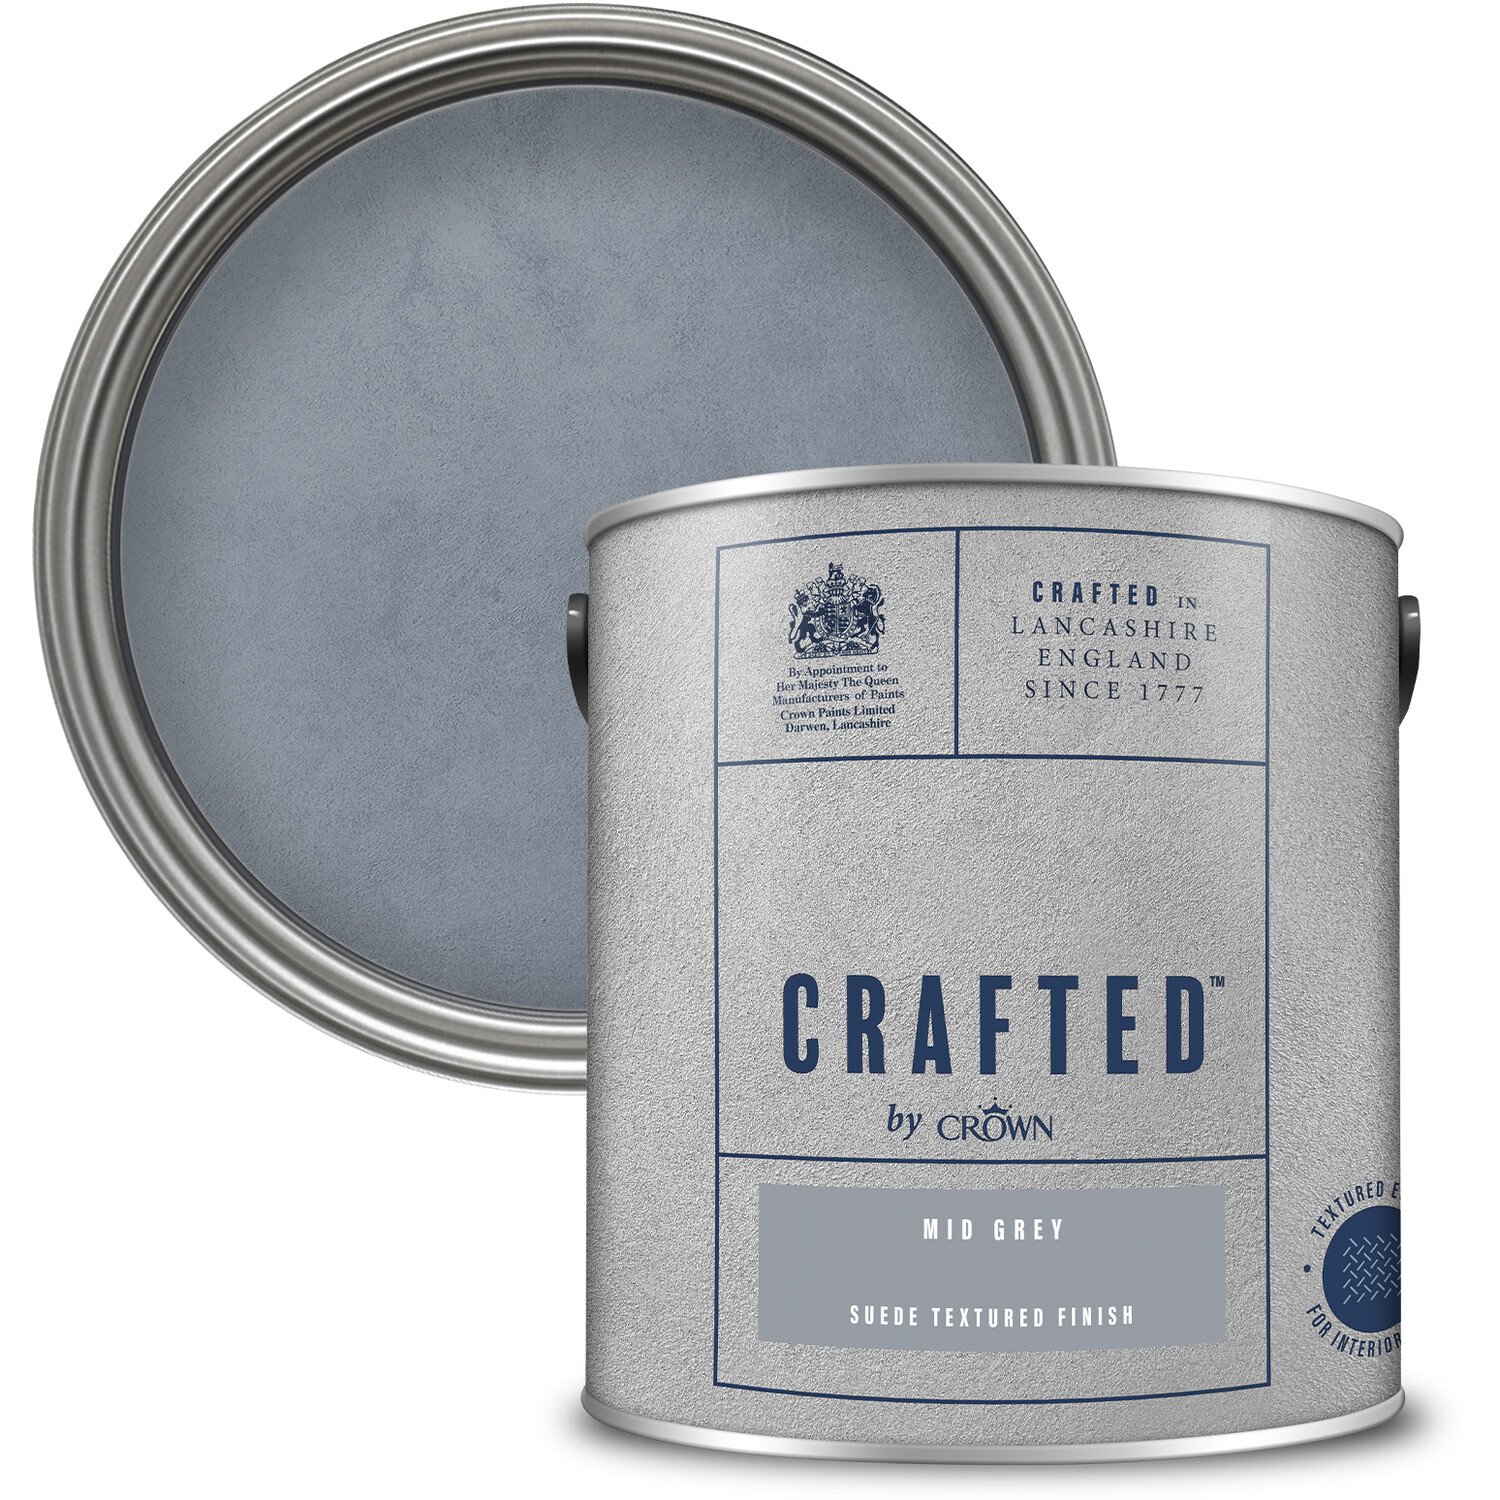 Crown Crafted Walls Mid Grey Suede Textured Finish Paint 2.5L Image 1